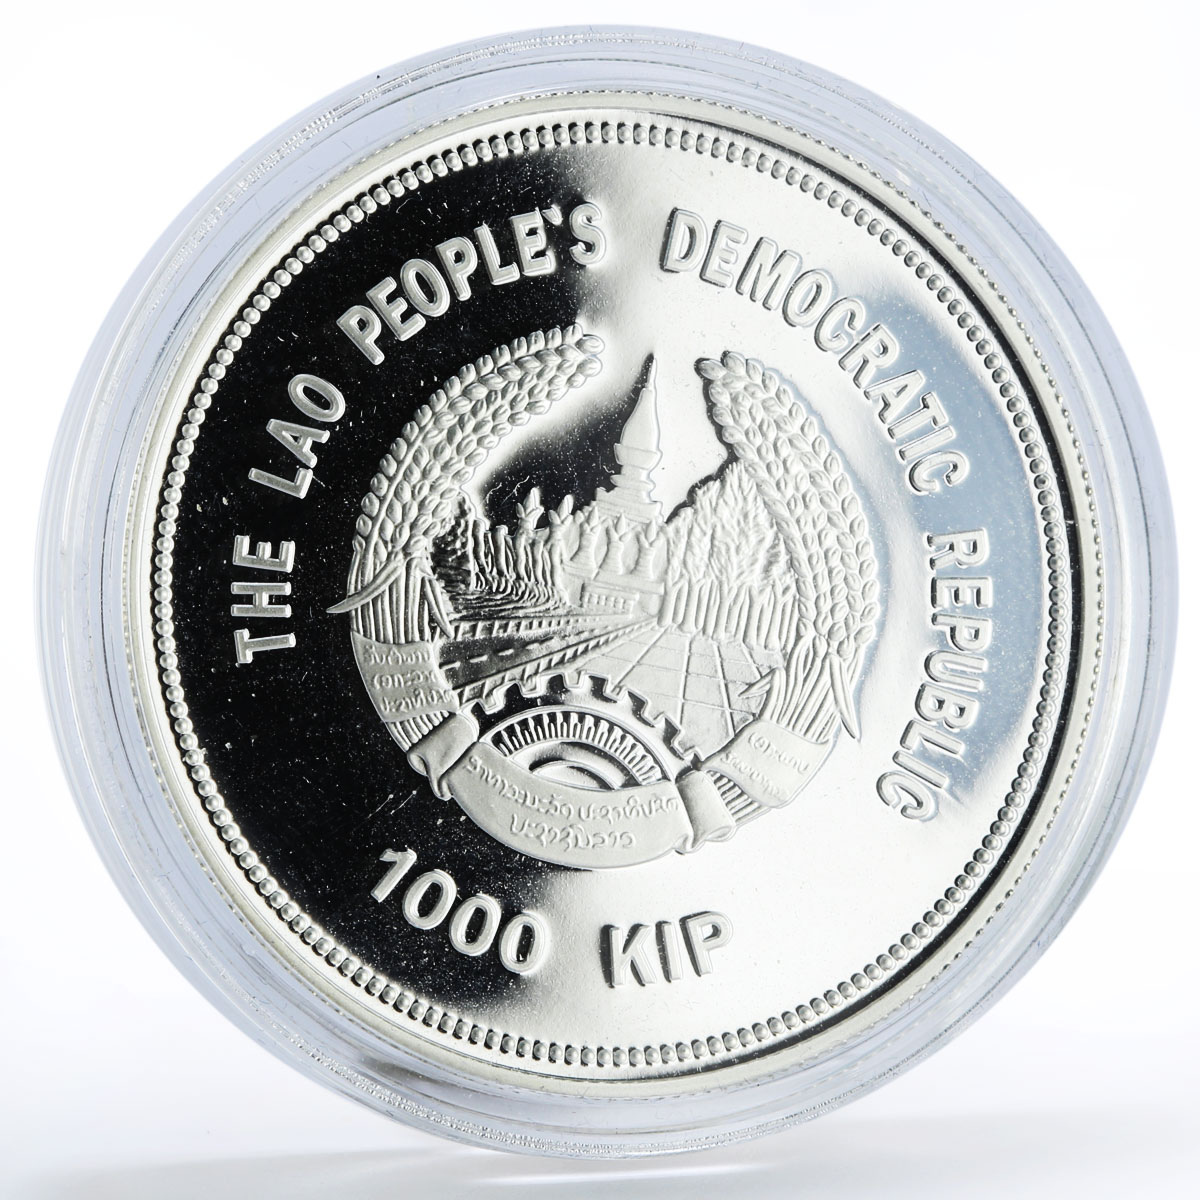 Laos 1000 kip Olympic Games Figure Skating silver proof coin 2014